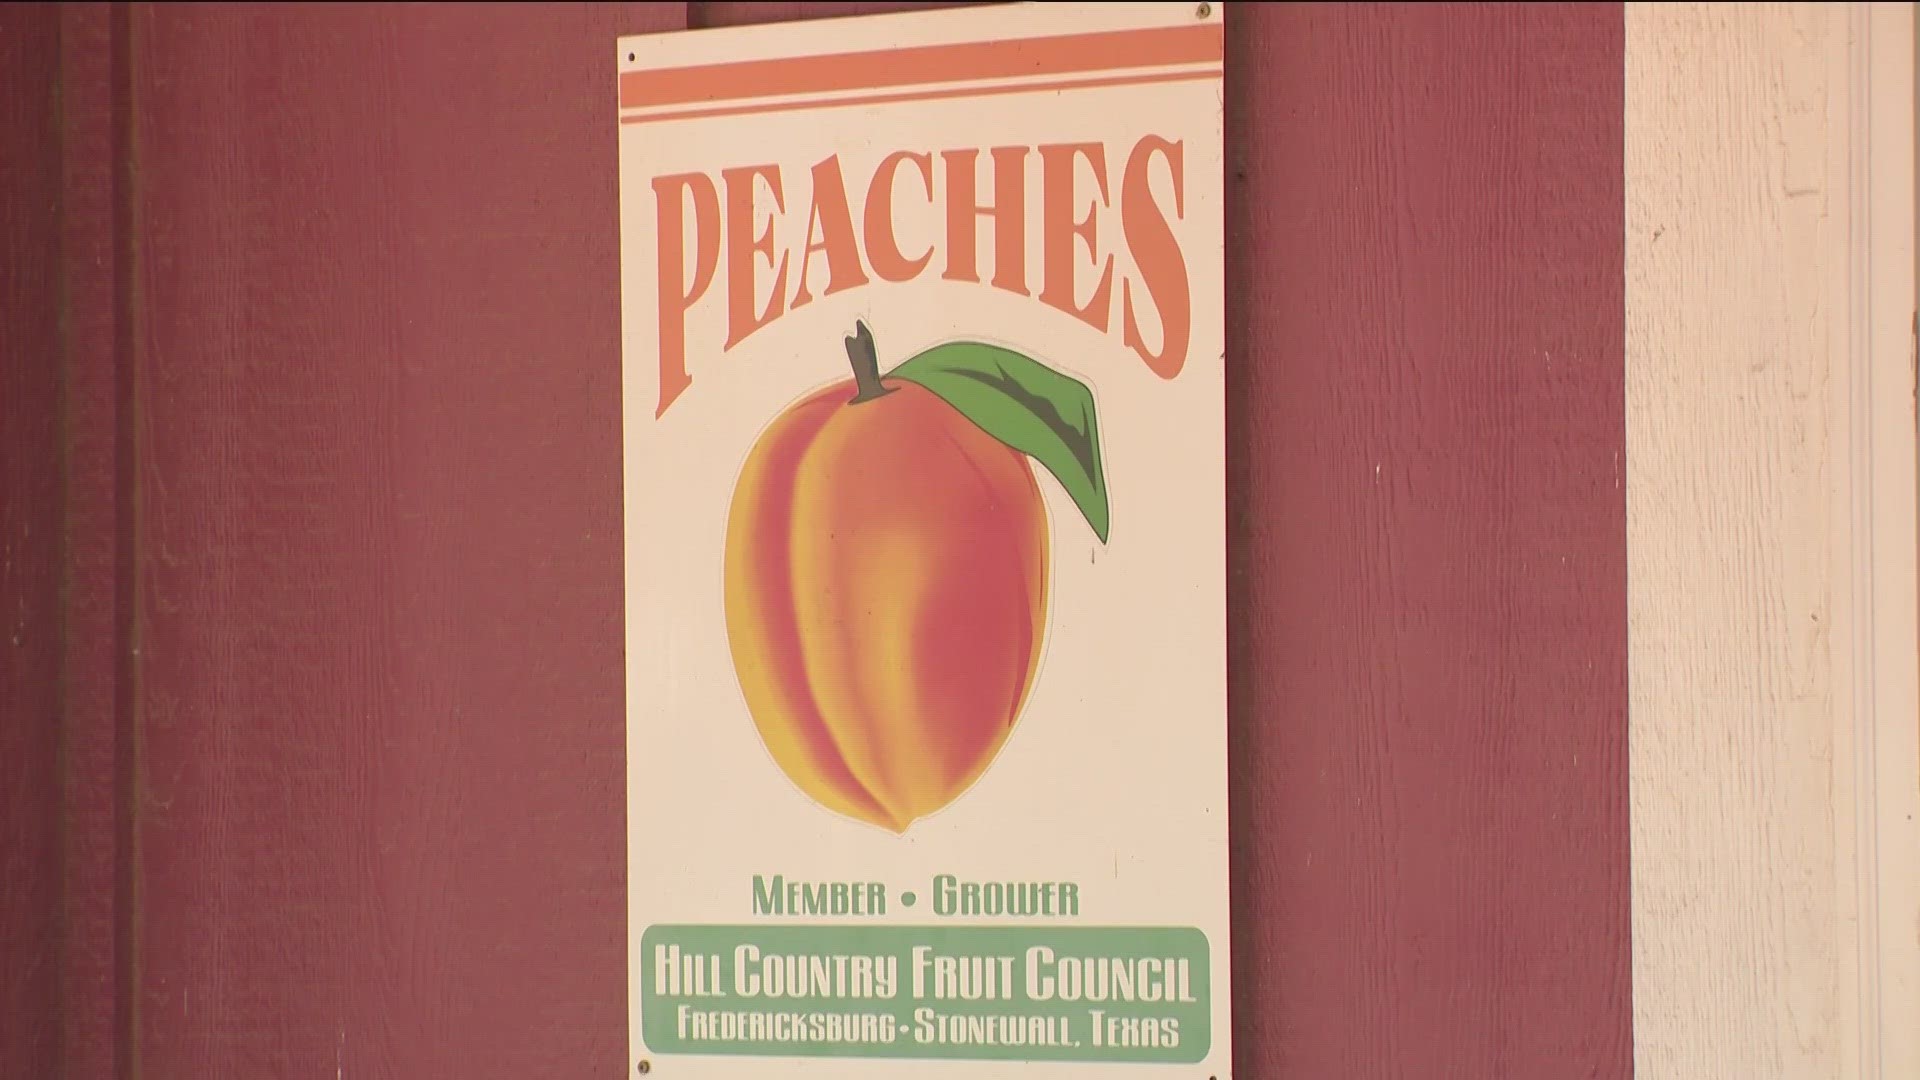 Summer in Texas typically means it's peach season, but weather conditions haven't been kind to the fruit this year.